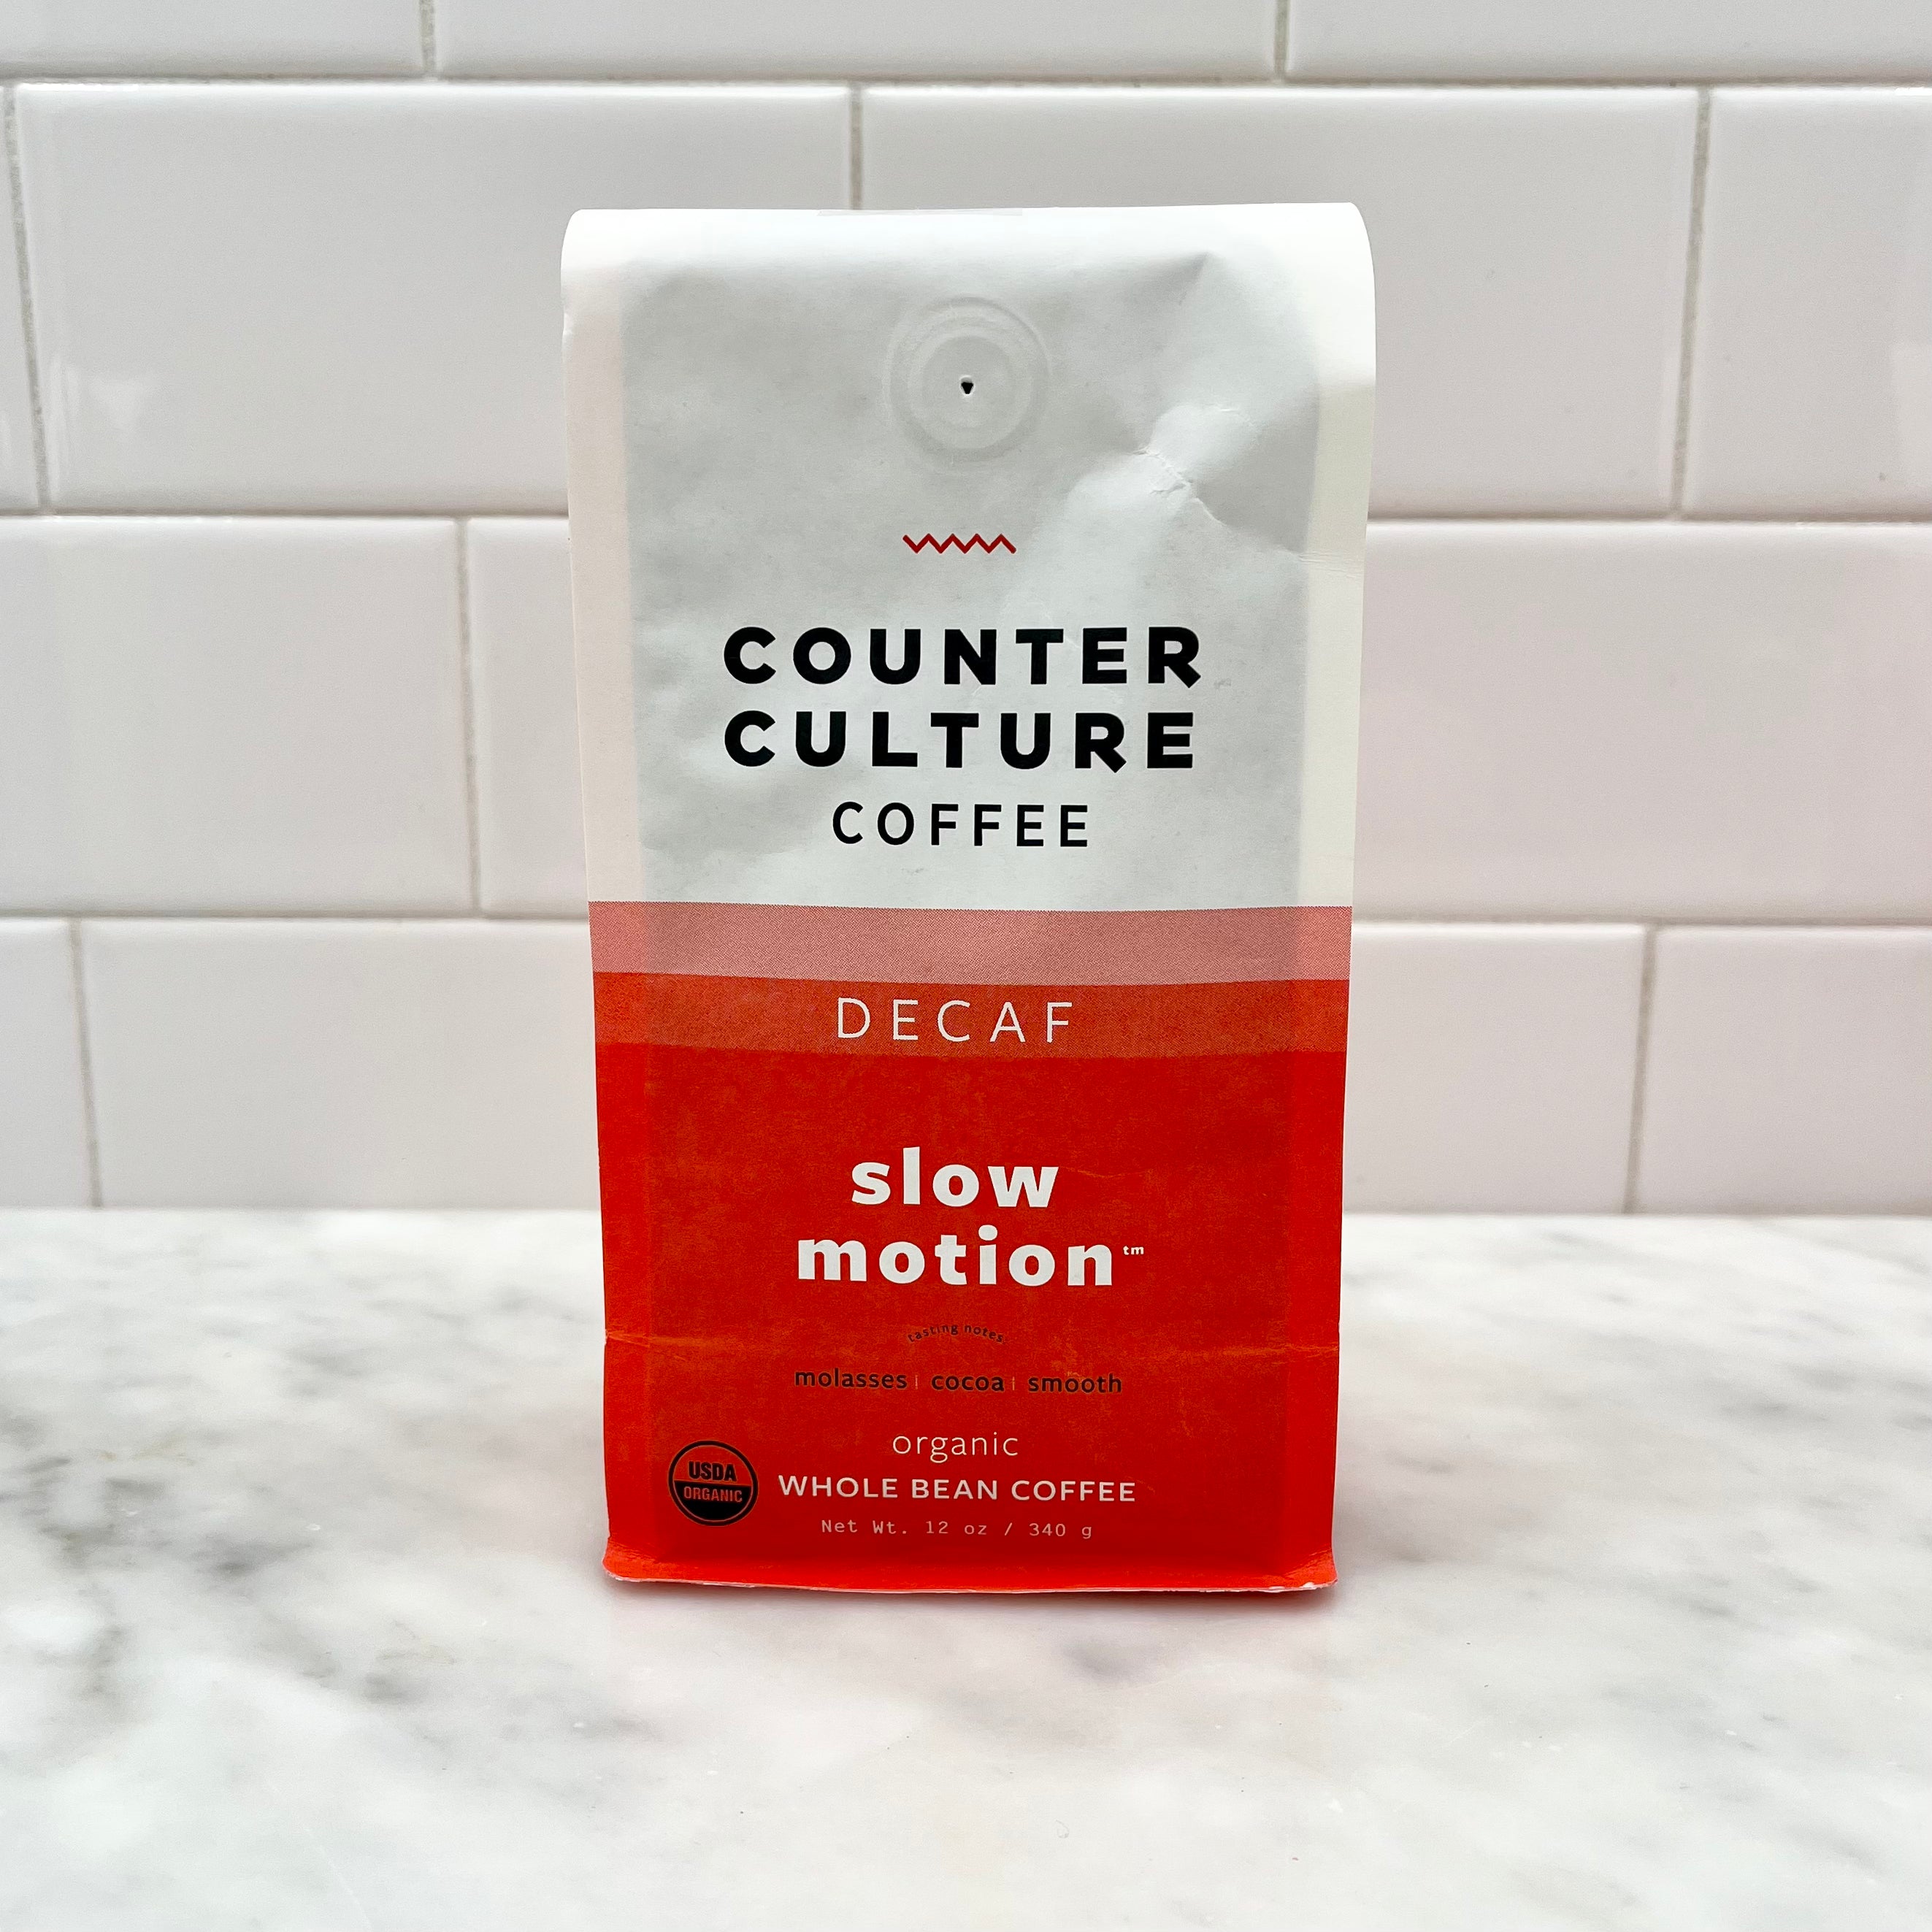 A bag of Counter Culture Decaf Slow Motion Whole Bean Coffee on a counter.